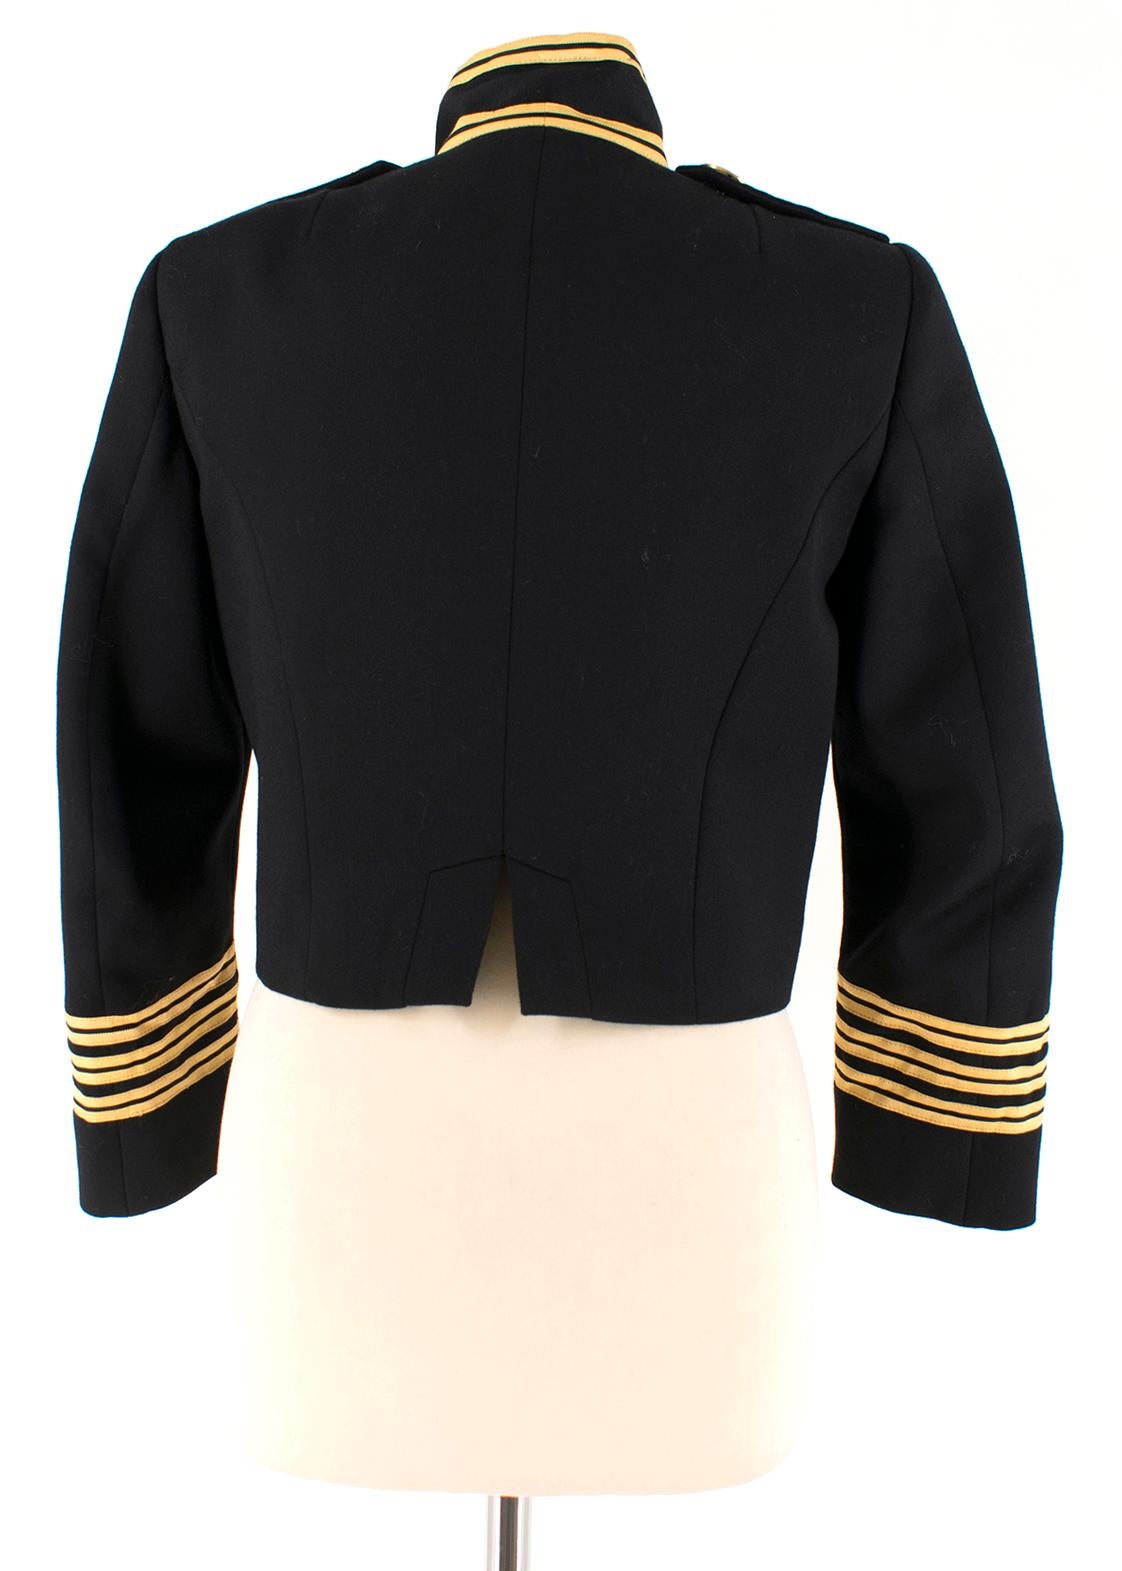 black and gold military jacket